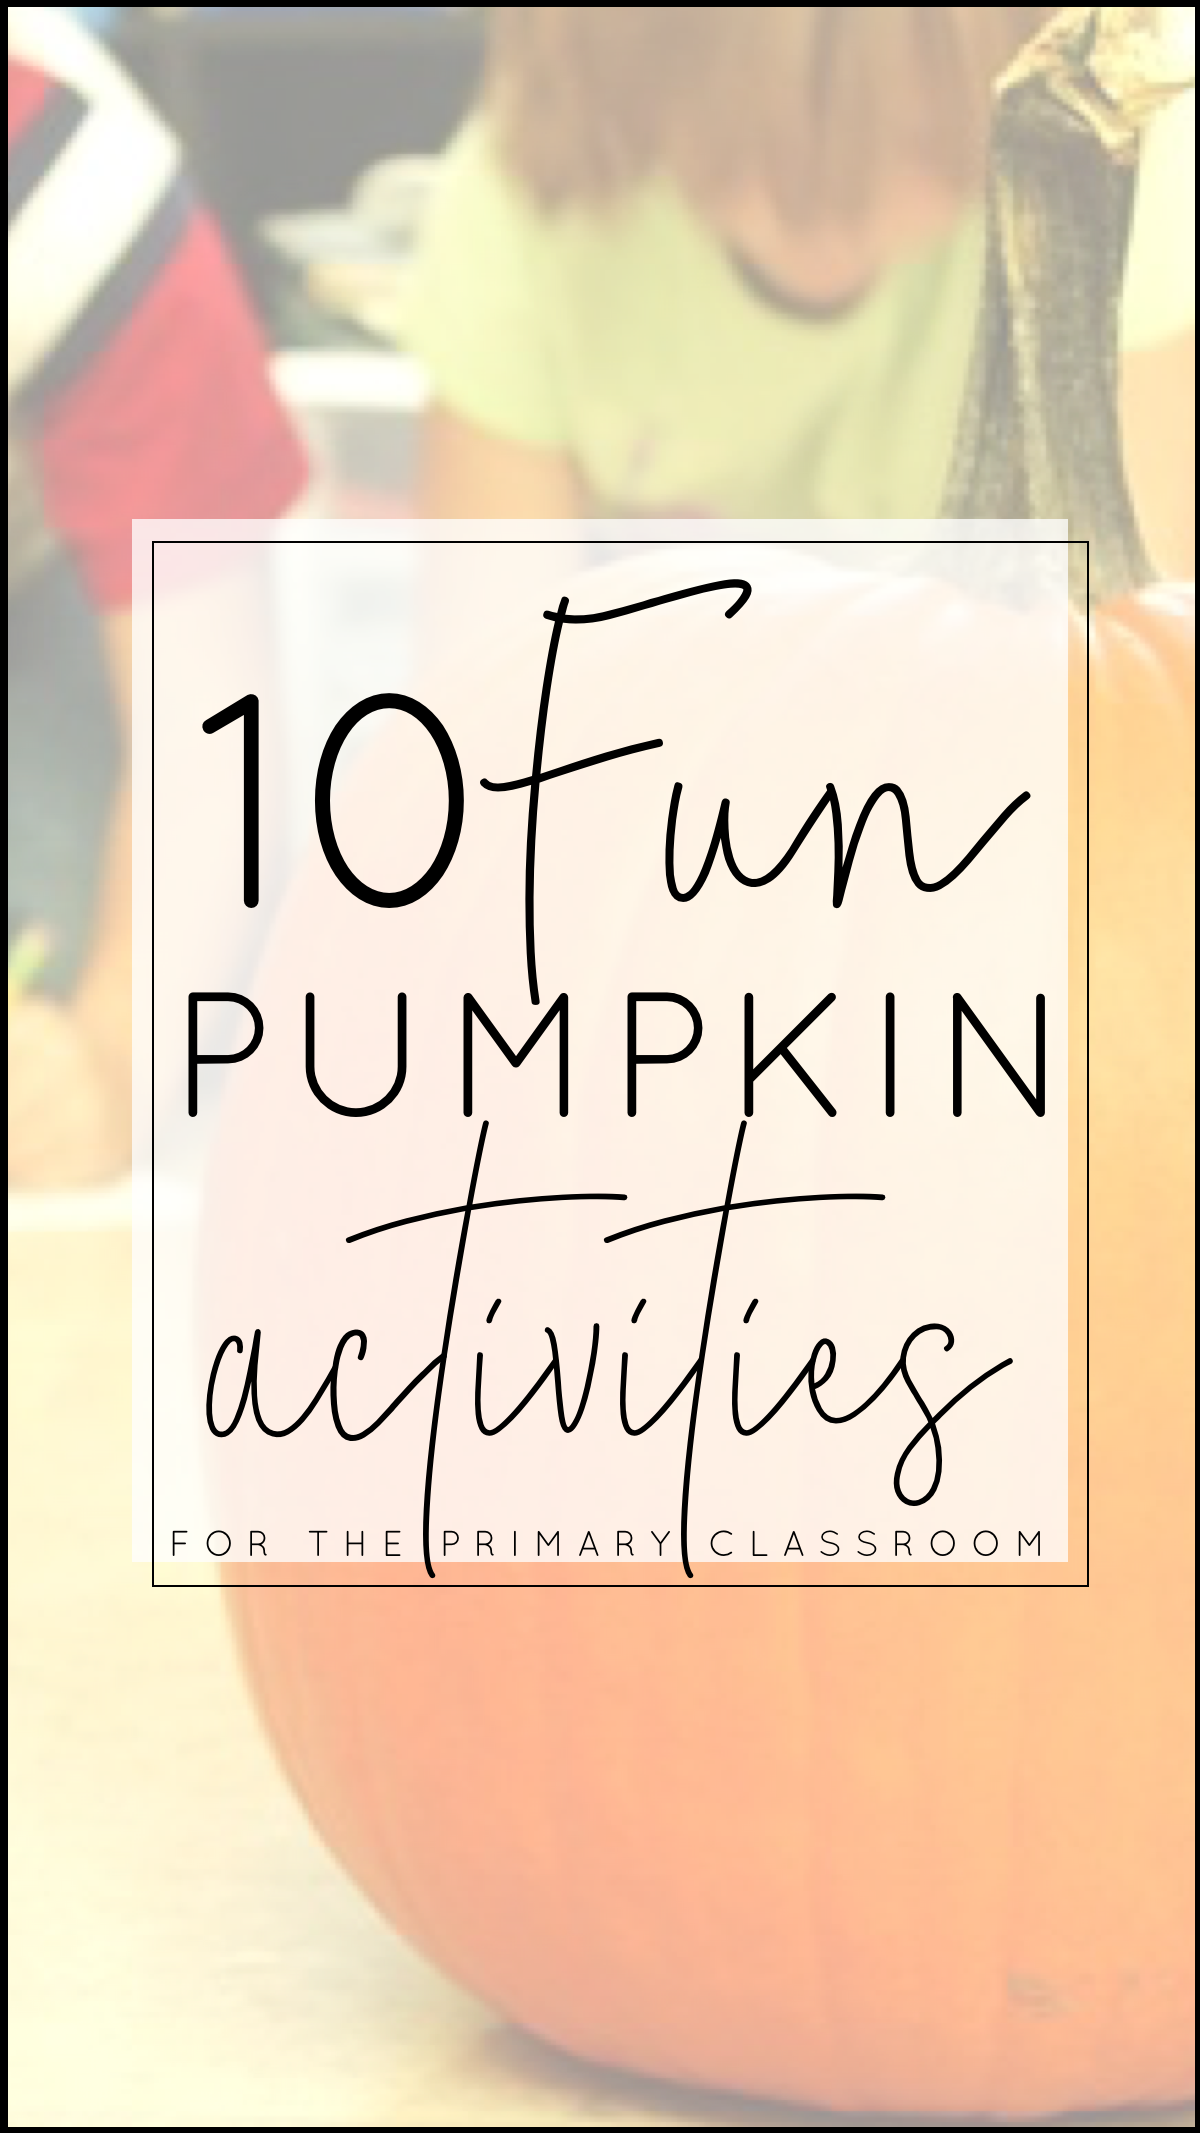 Check out 10 fun pumpkin activities that are perfect for the primary classroom! They are perfect for pre-K, t-K, preschool, kindergarten, first grade and second grade. This post includes lots of cross-curricular connections for ELA, math, and science. You'll find book recommendations, STEM activities, math fun, pumpkin investigations, and MORE! #pumpkins #activities #elementary #primary #school #teach #babblingabby #theinspiredapple #teaching #theme #thematicunit #unit #pumpkinunit #fall #autumn #kindergarten #firstgrade #secondgrade #preschool #pumpkinfun